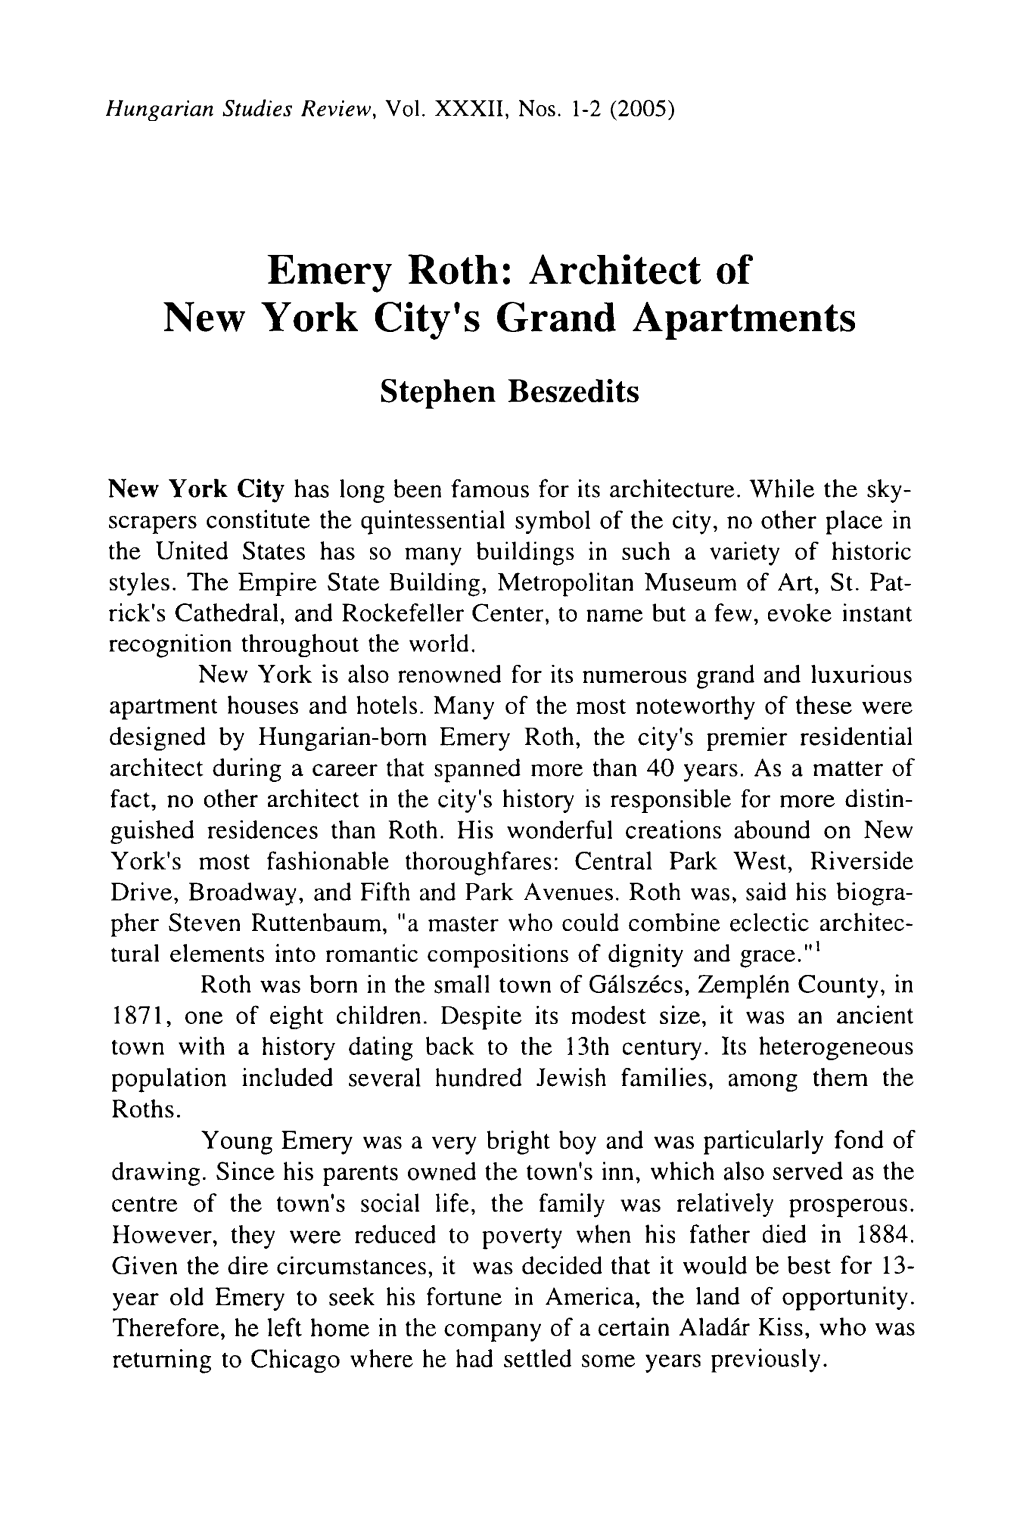 Emery Roth: Architect of New York City's Grand Apartments